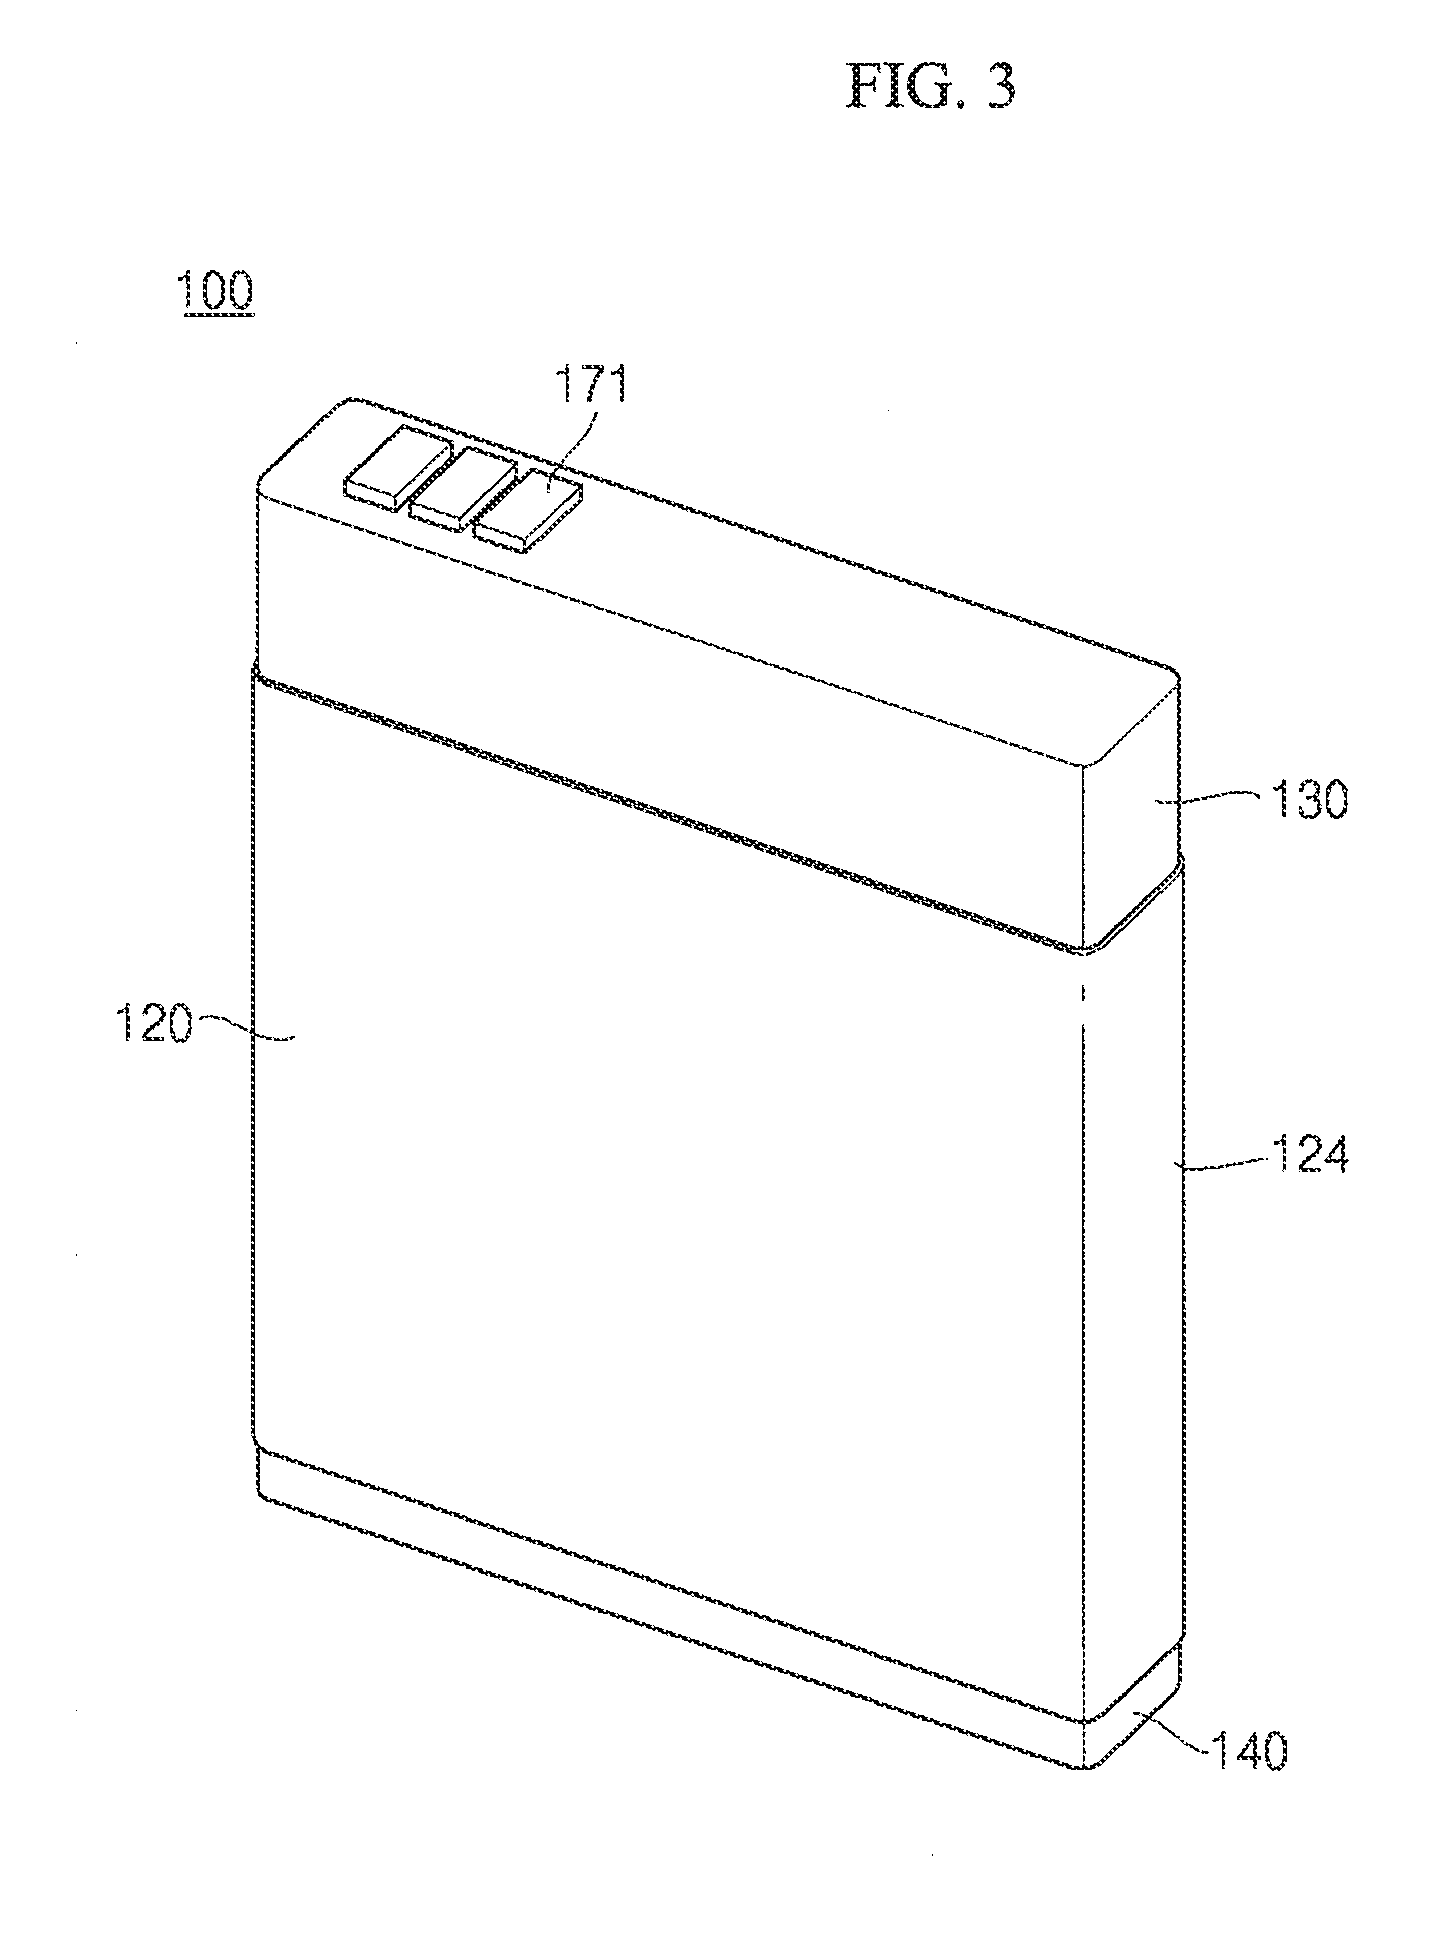 Lithium polymer secondary battery